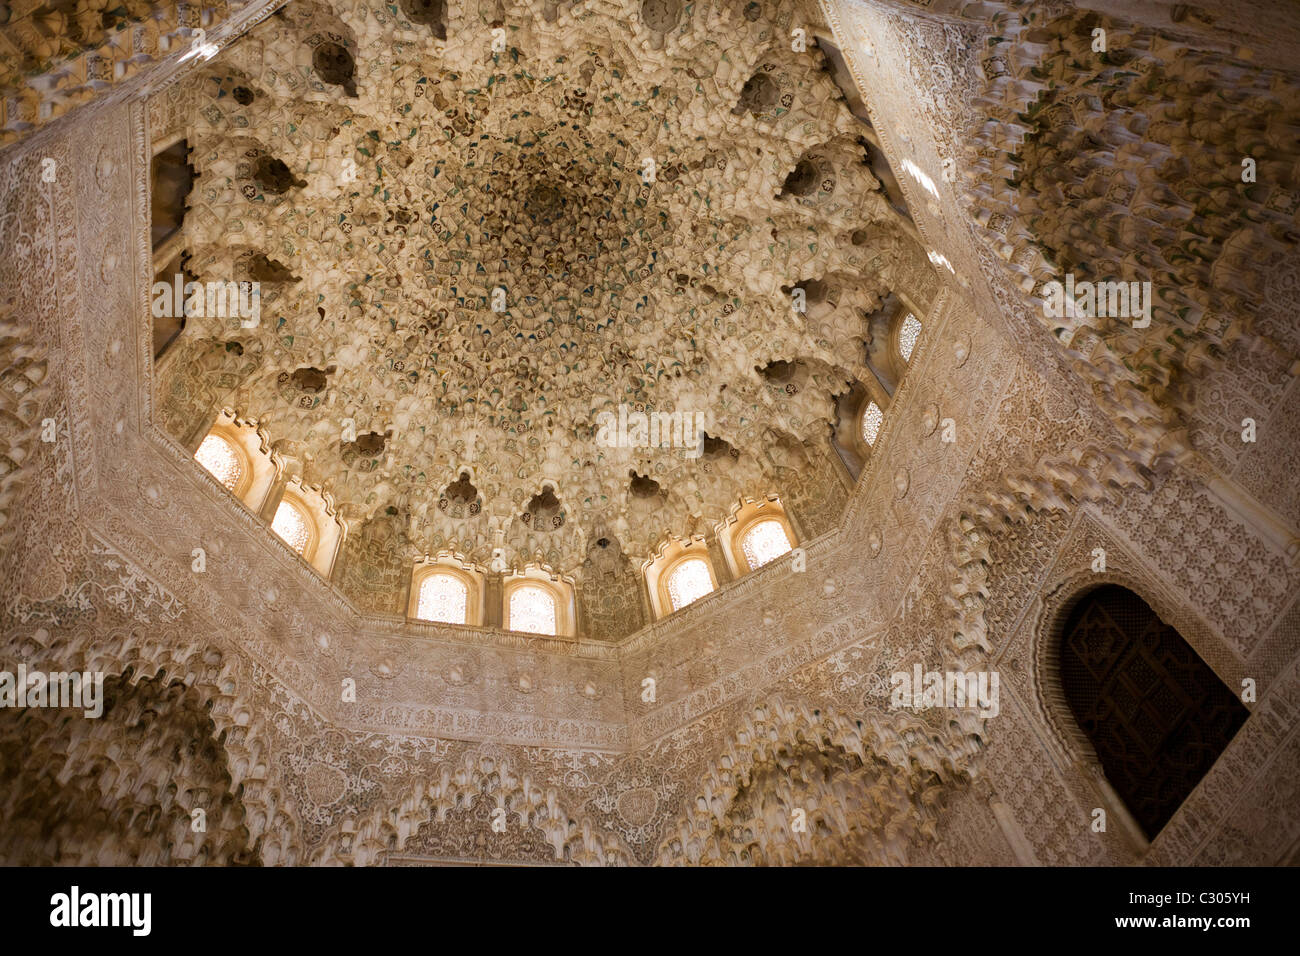 Ornate domed architecture in the Sala de dos Hermanas (Hall of the Two Sisters) in Alhambra Palace. Stock Photo